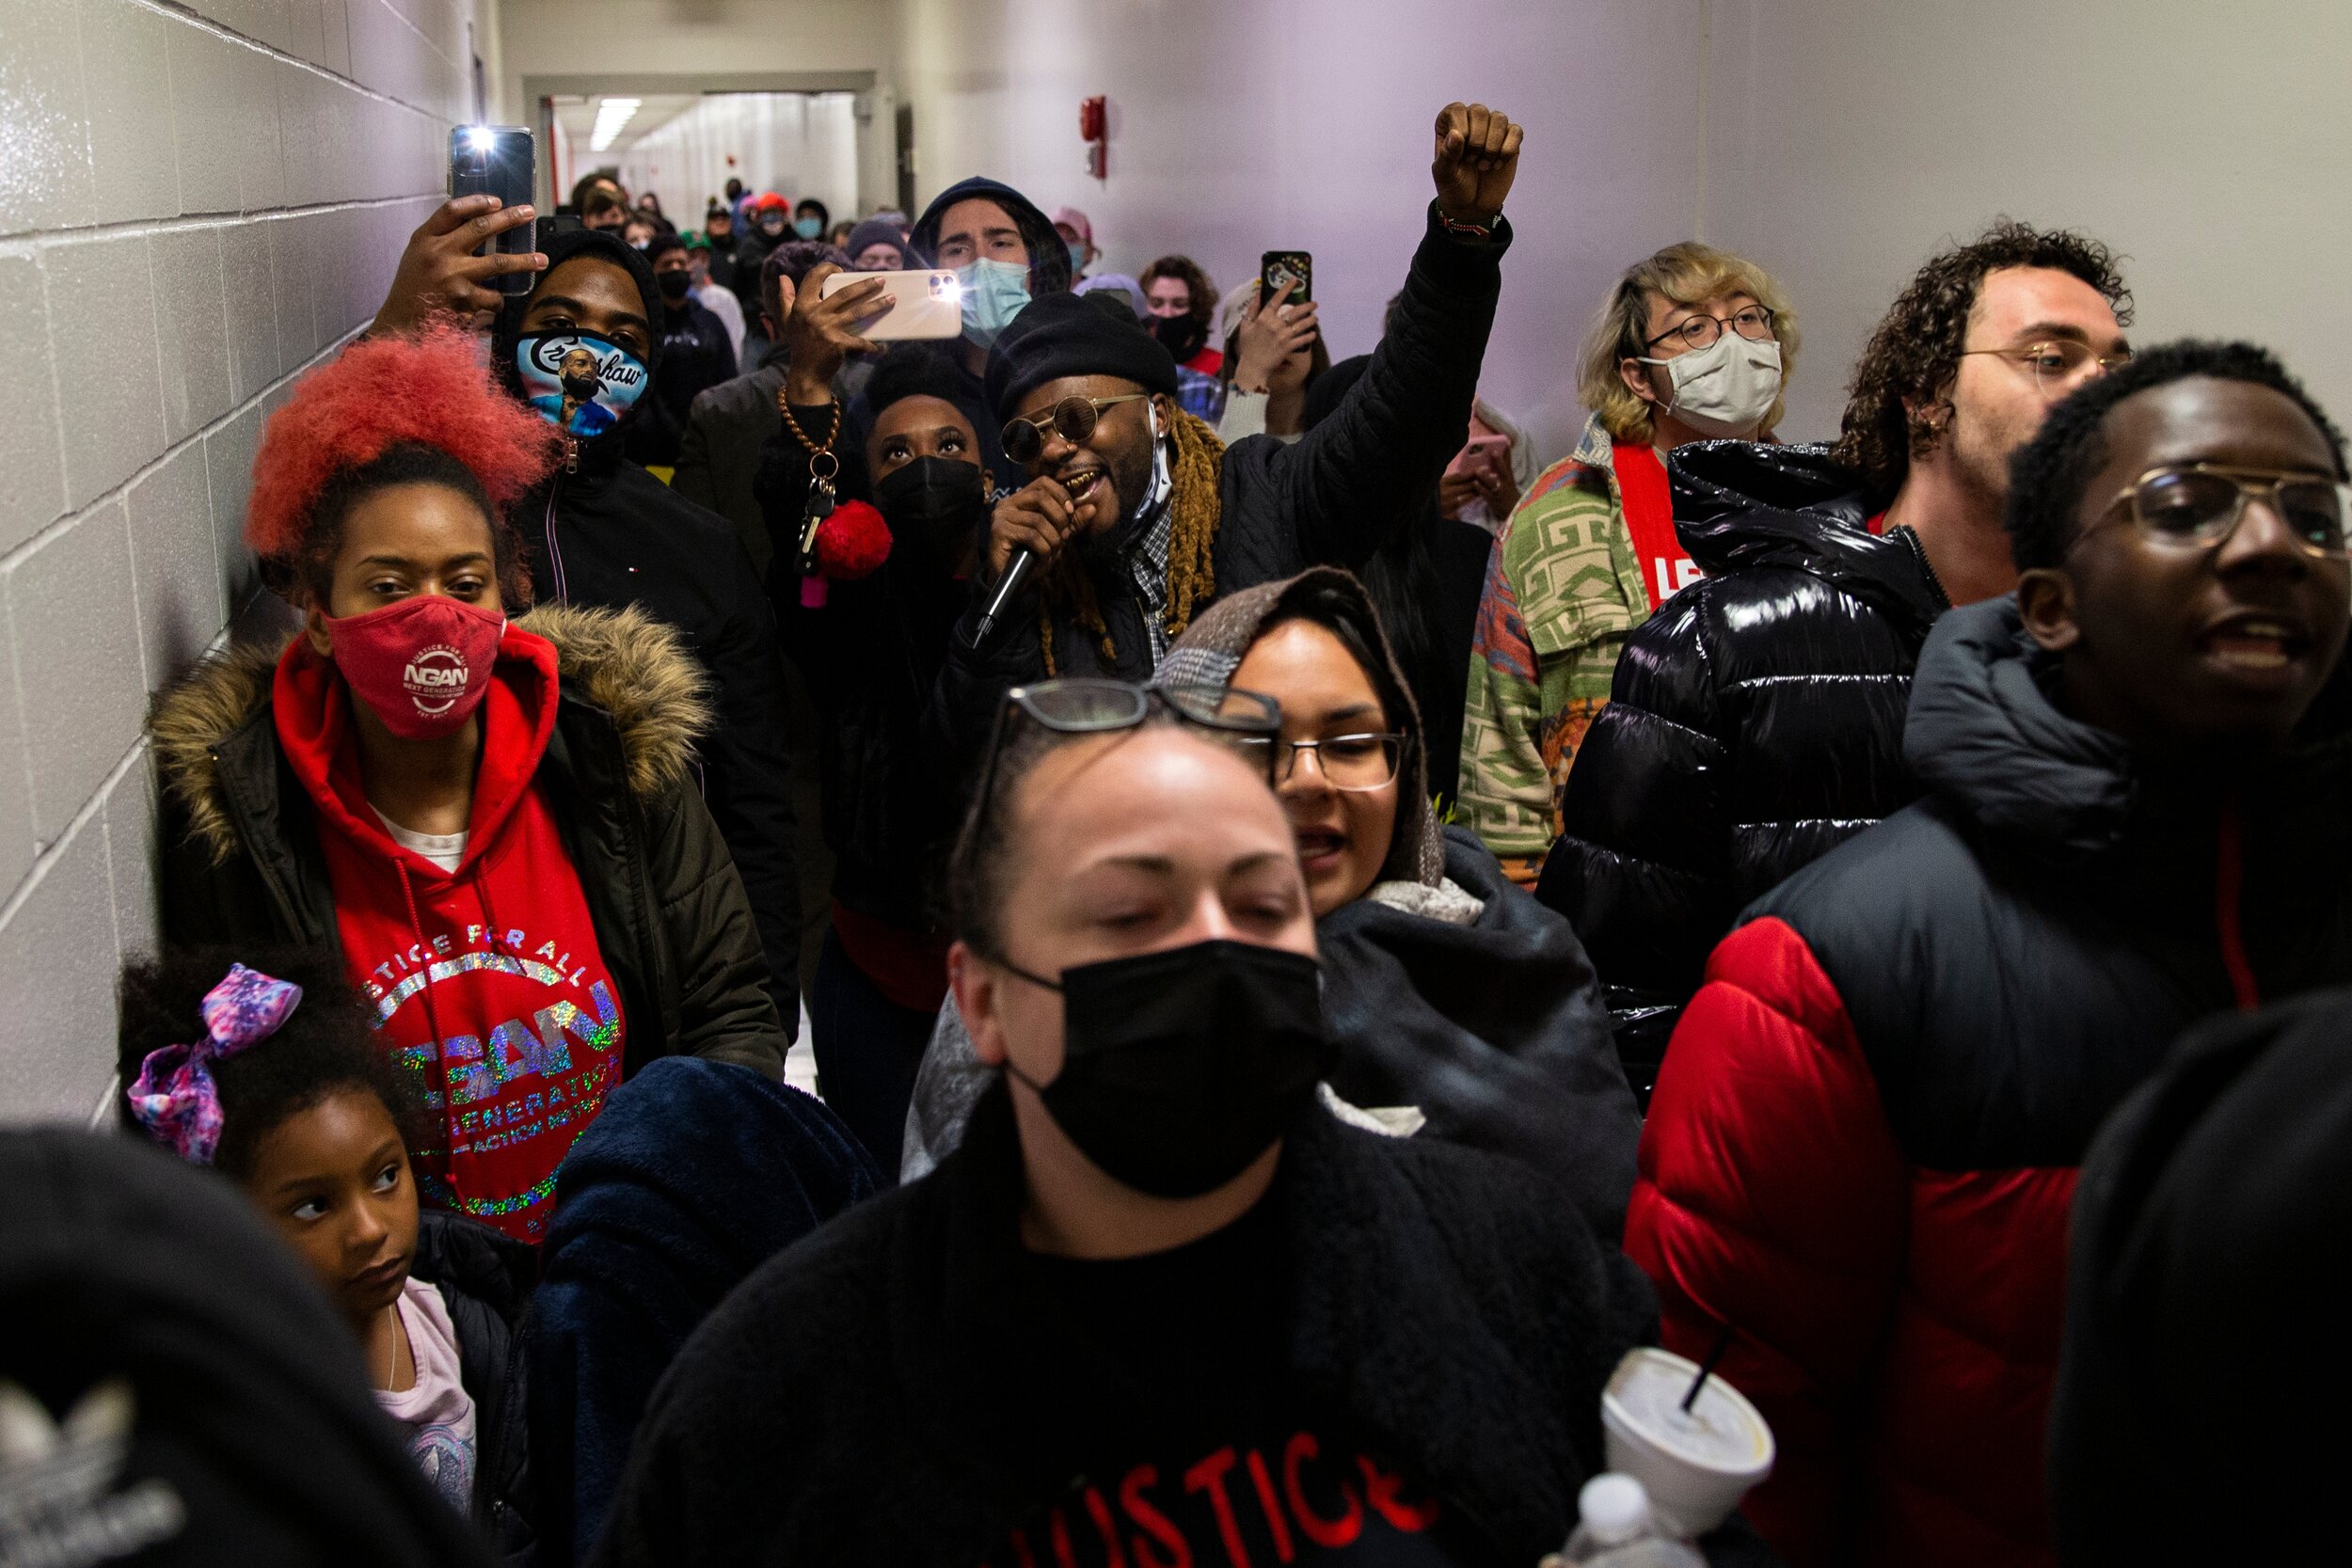  Christopher A. Williams-Watkins (center) leads a chant demanding for justice in the halls of the Collin County Jail for his friend Marvin Scott III, who died while in custody in the jail in McKinney, TX.  